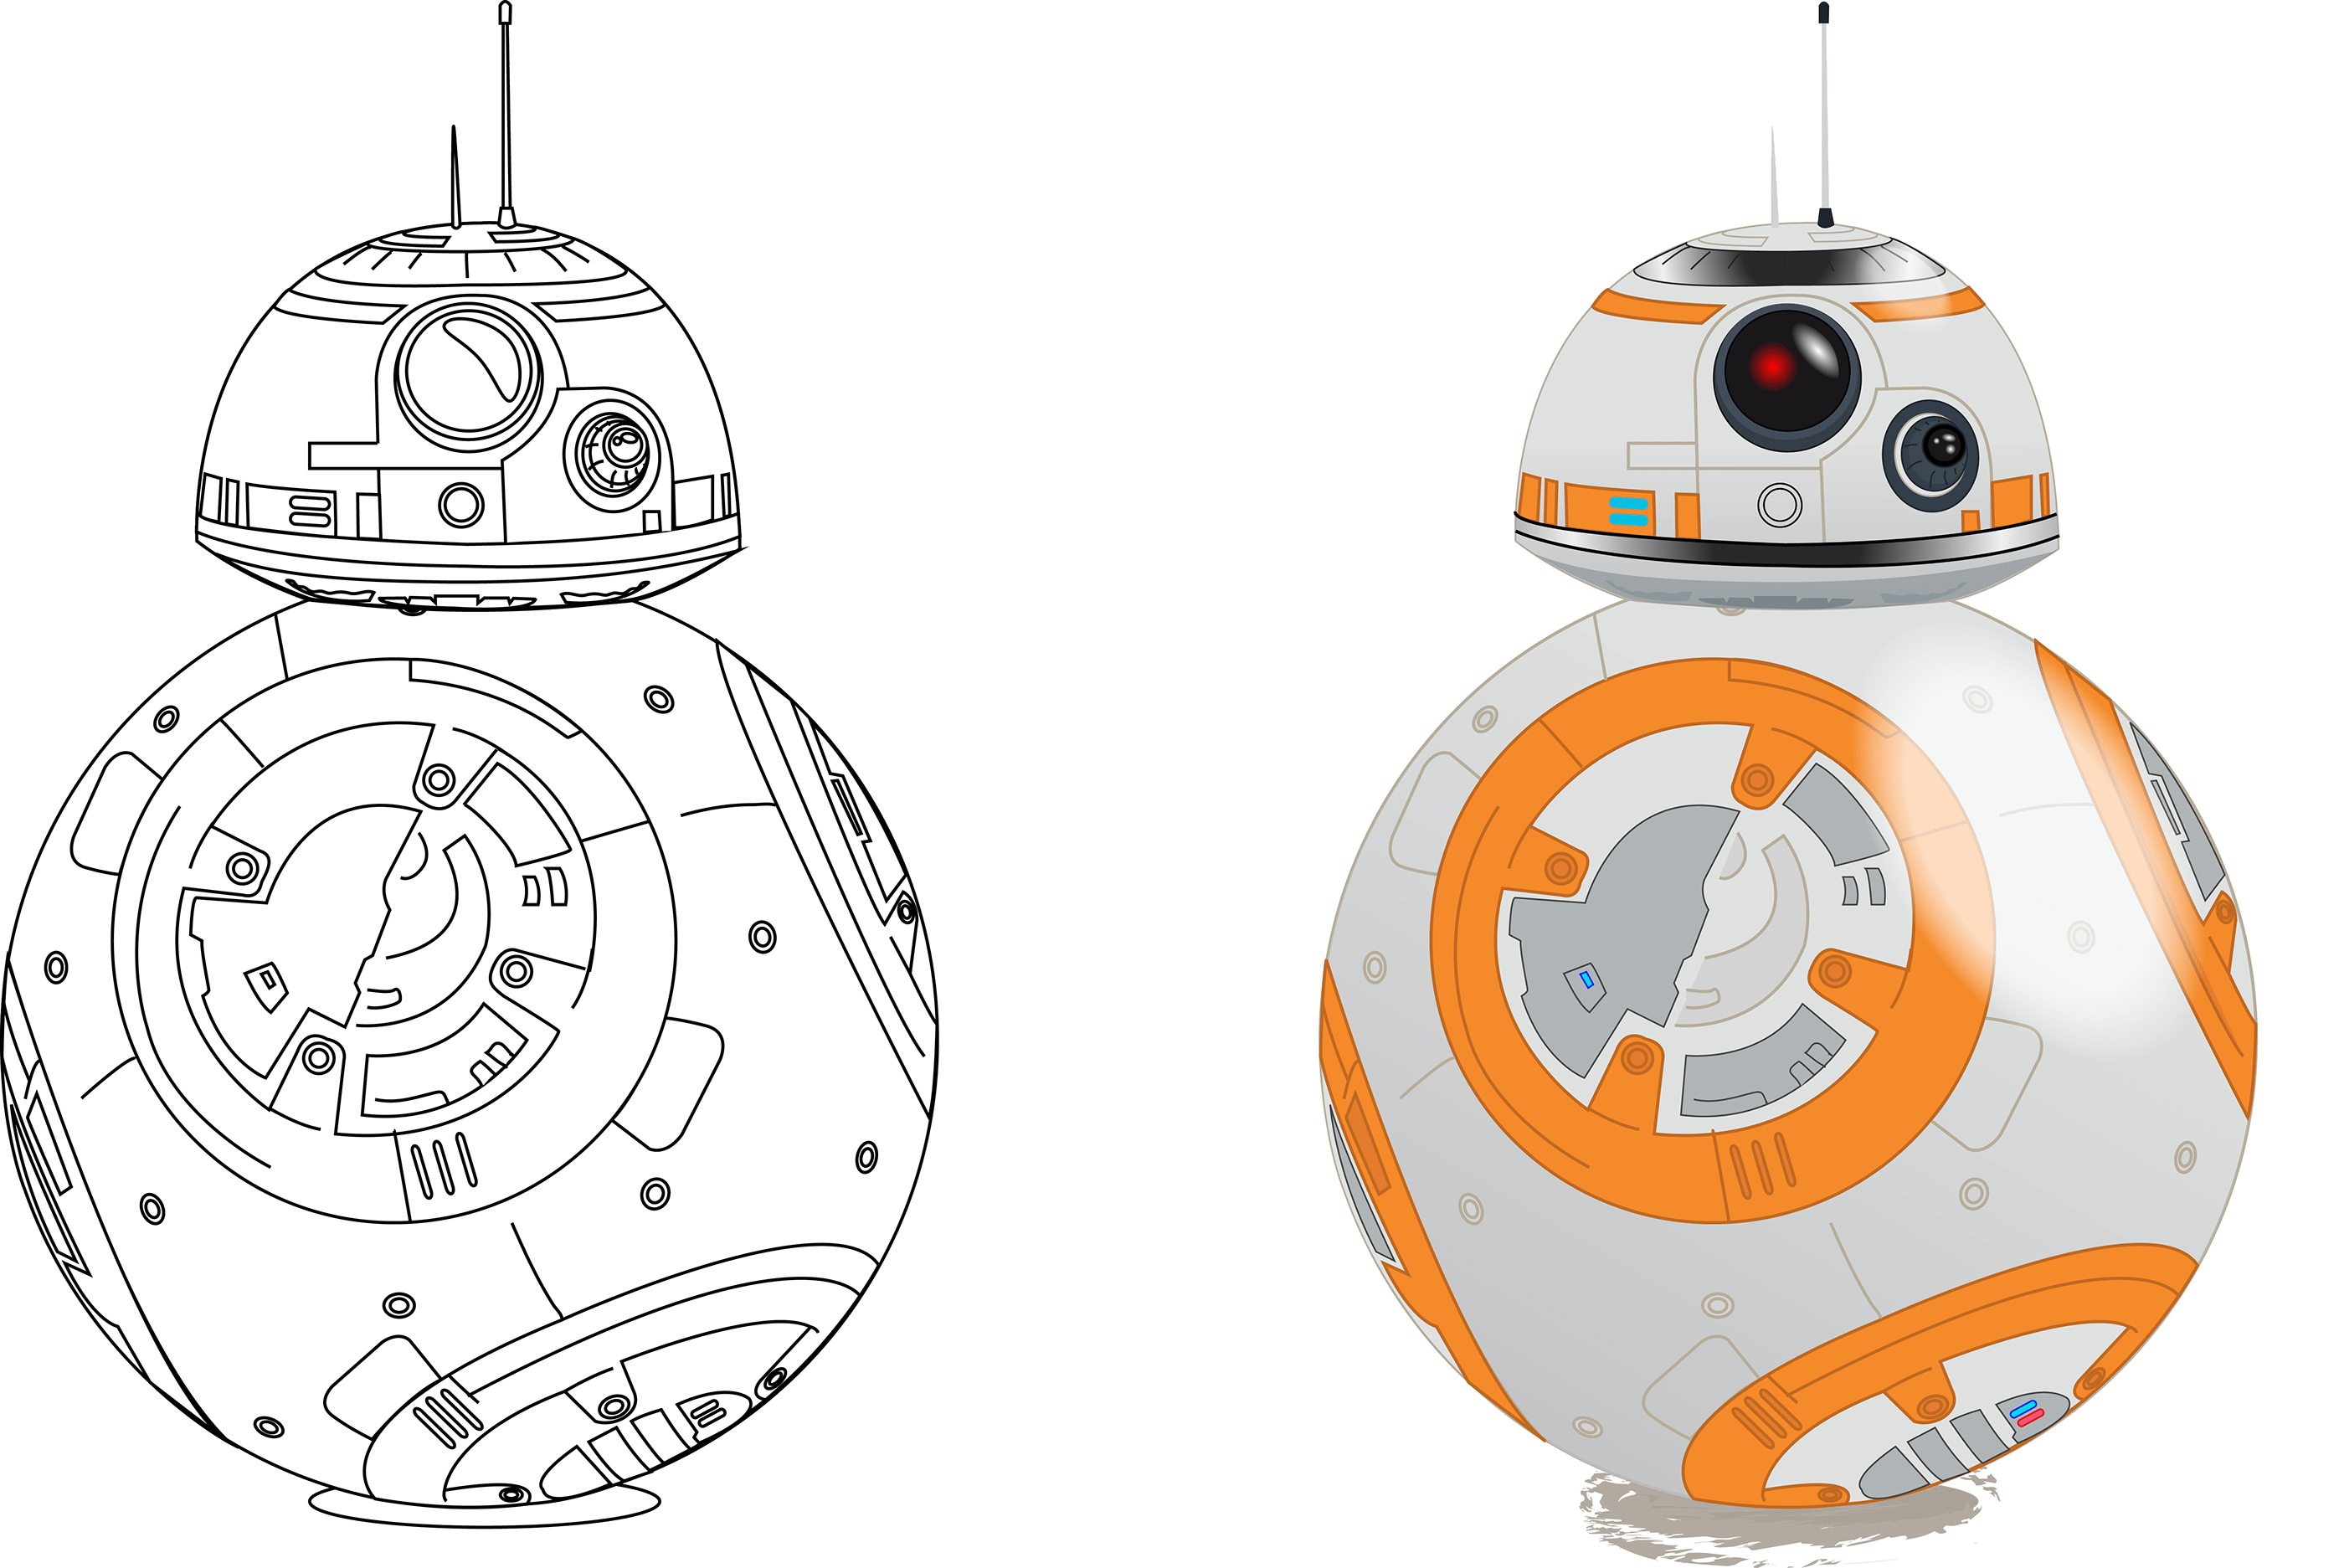 BB-8 animation test on AfterEffects (personal work) .